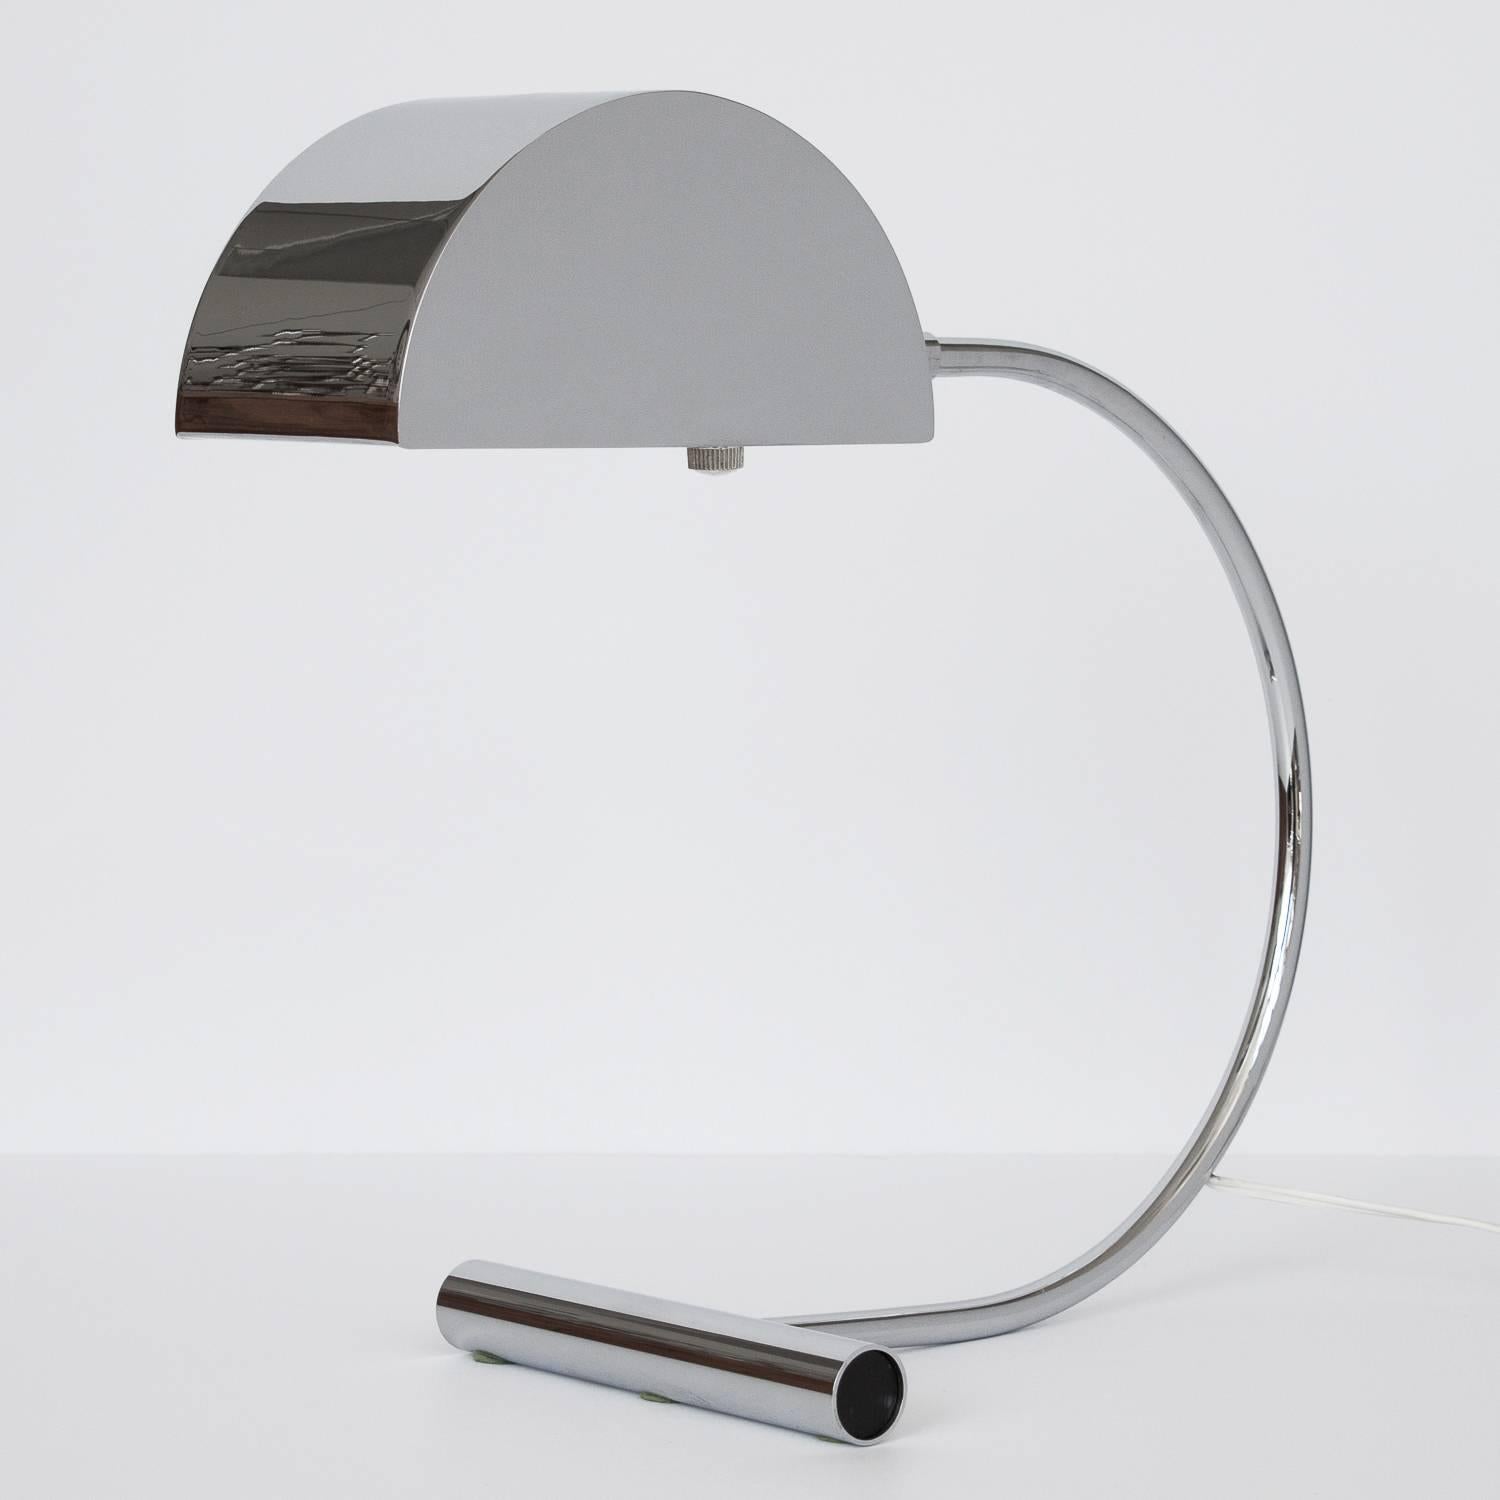 Koch and Lowy polished chrome cantilevered desk lamp. Weighted cylinder base with curved arm that supports a half cylinder chrome shade. Adjustable shade / lamp head. Takes one standard light bulb. Dimmable switch located on socket. Working